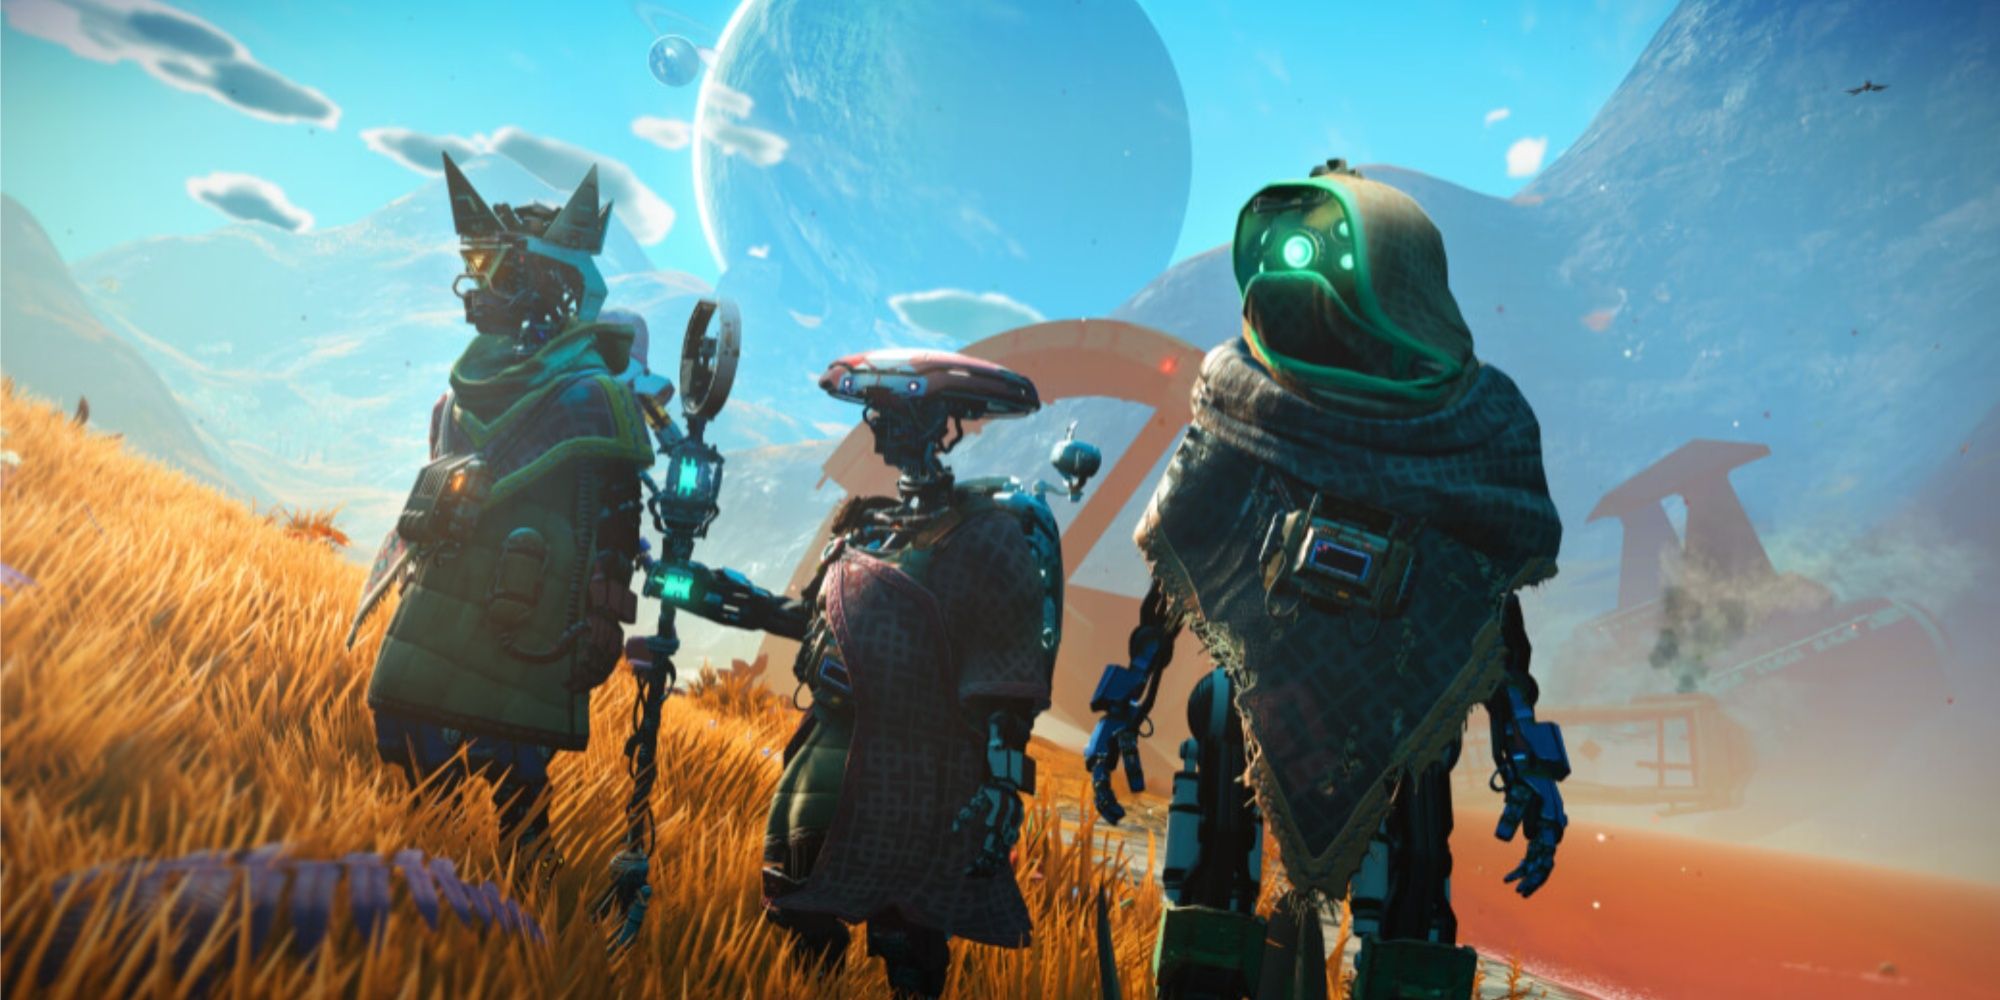 Echoes was one of the best expansions in No Man's Sky 